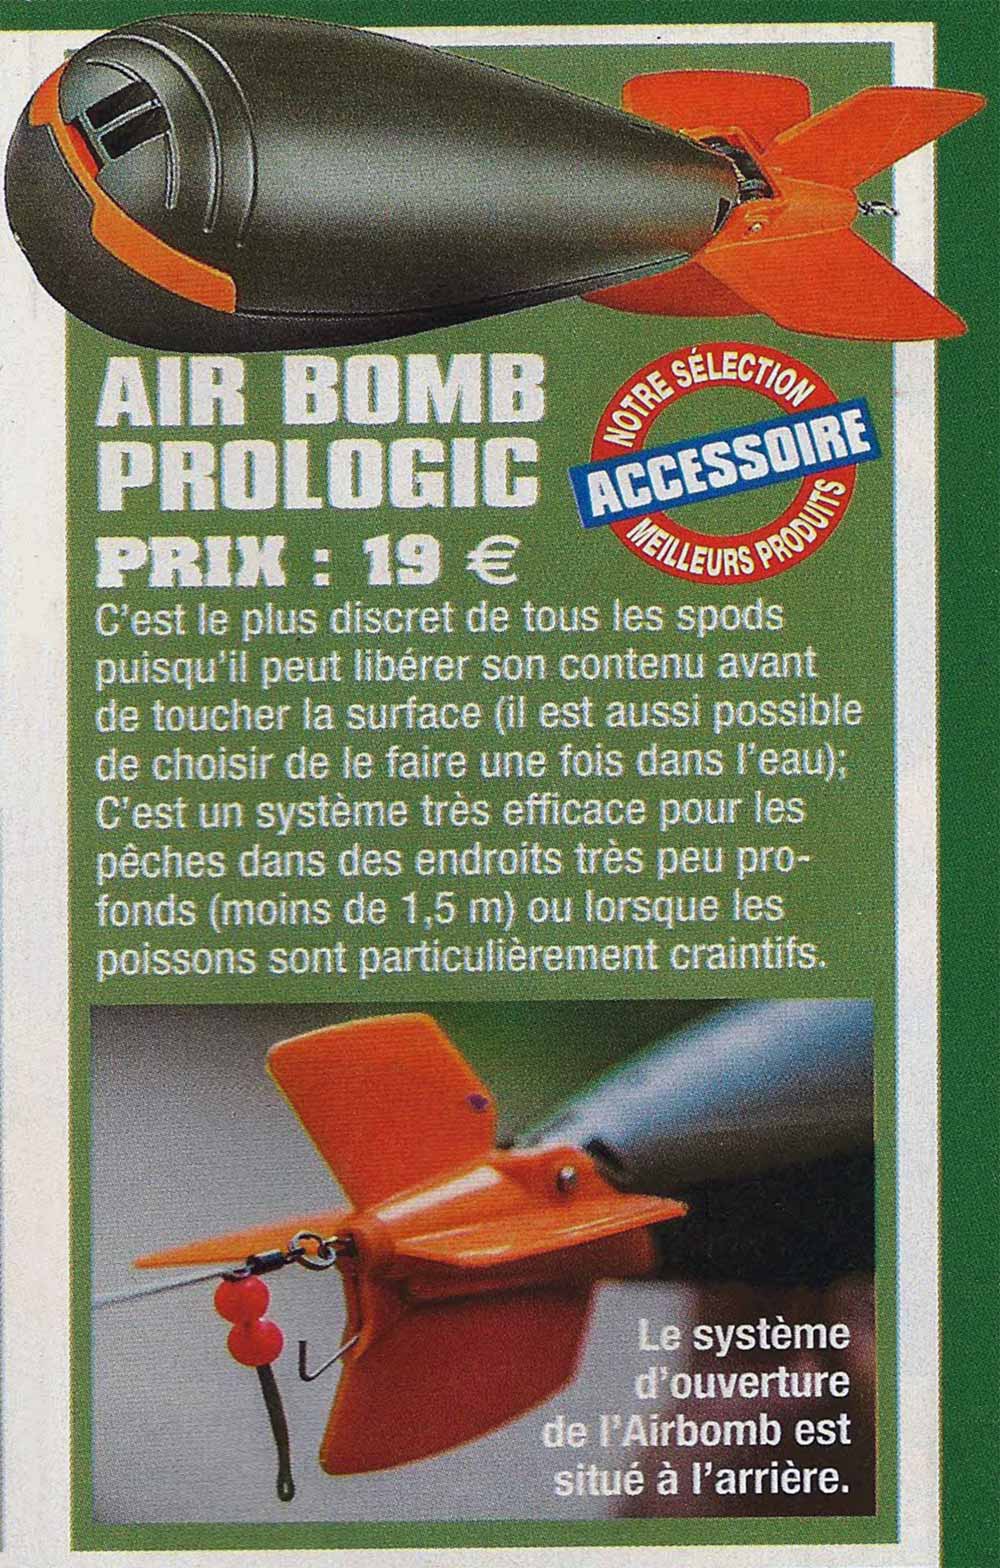 airbombprologic